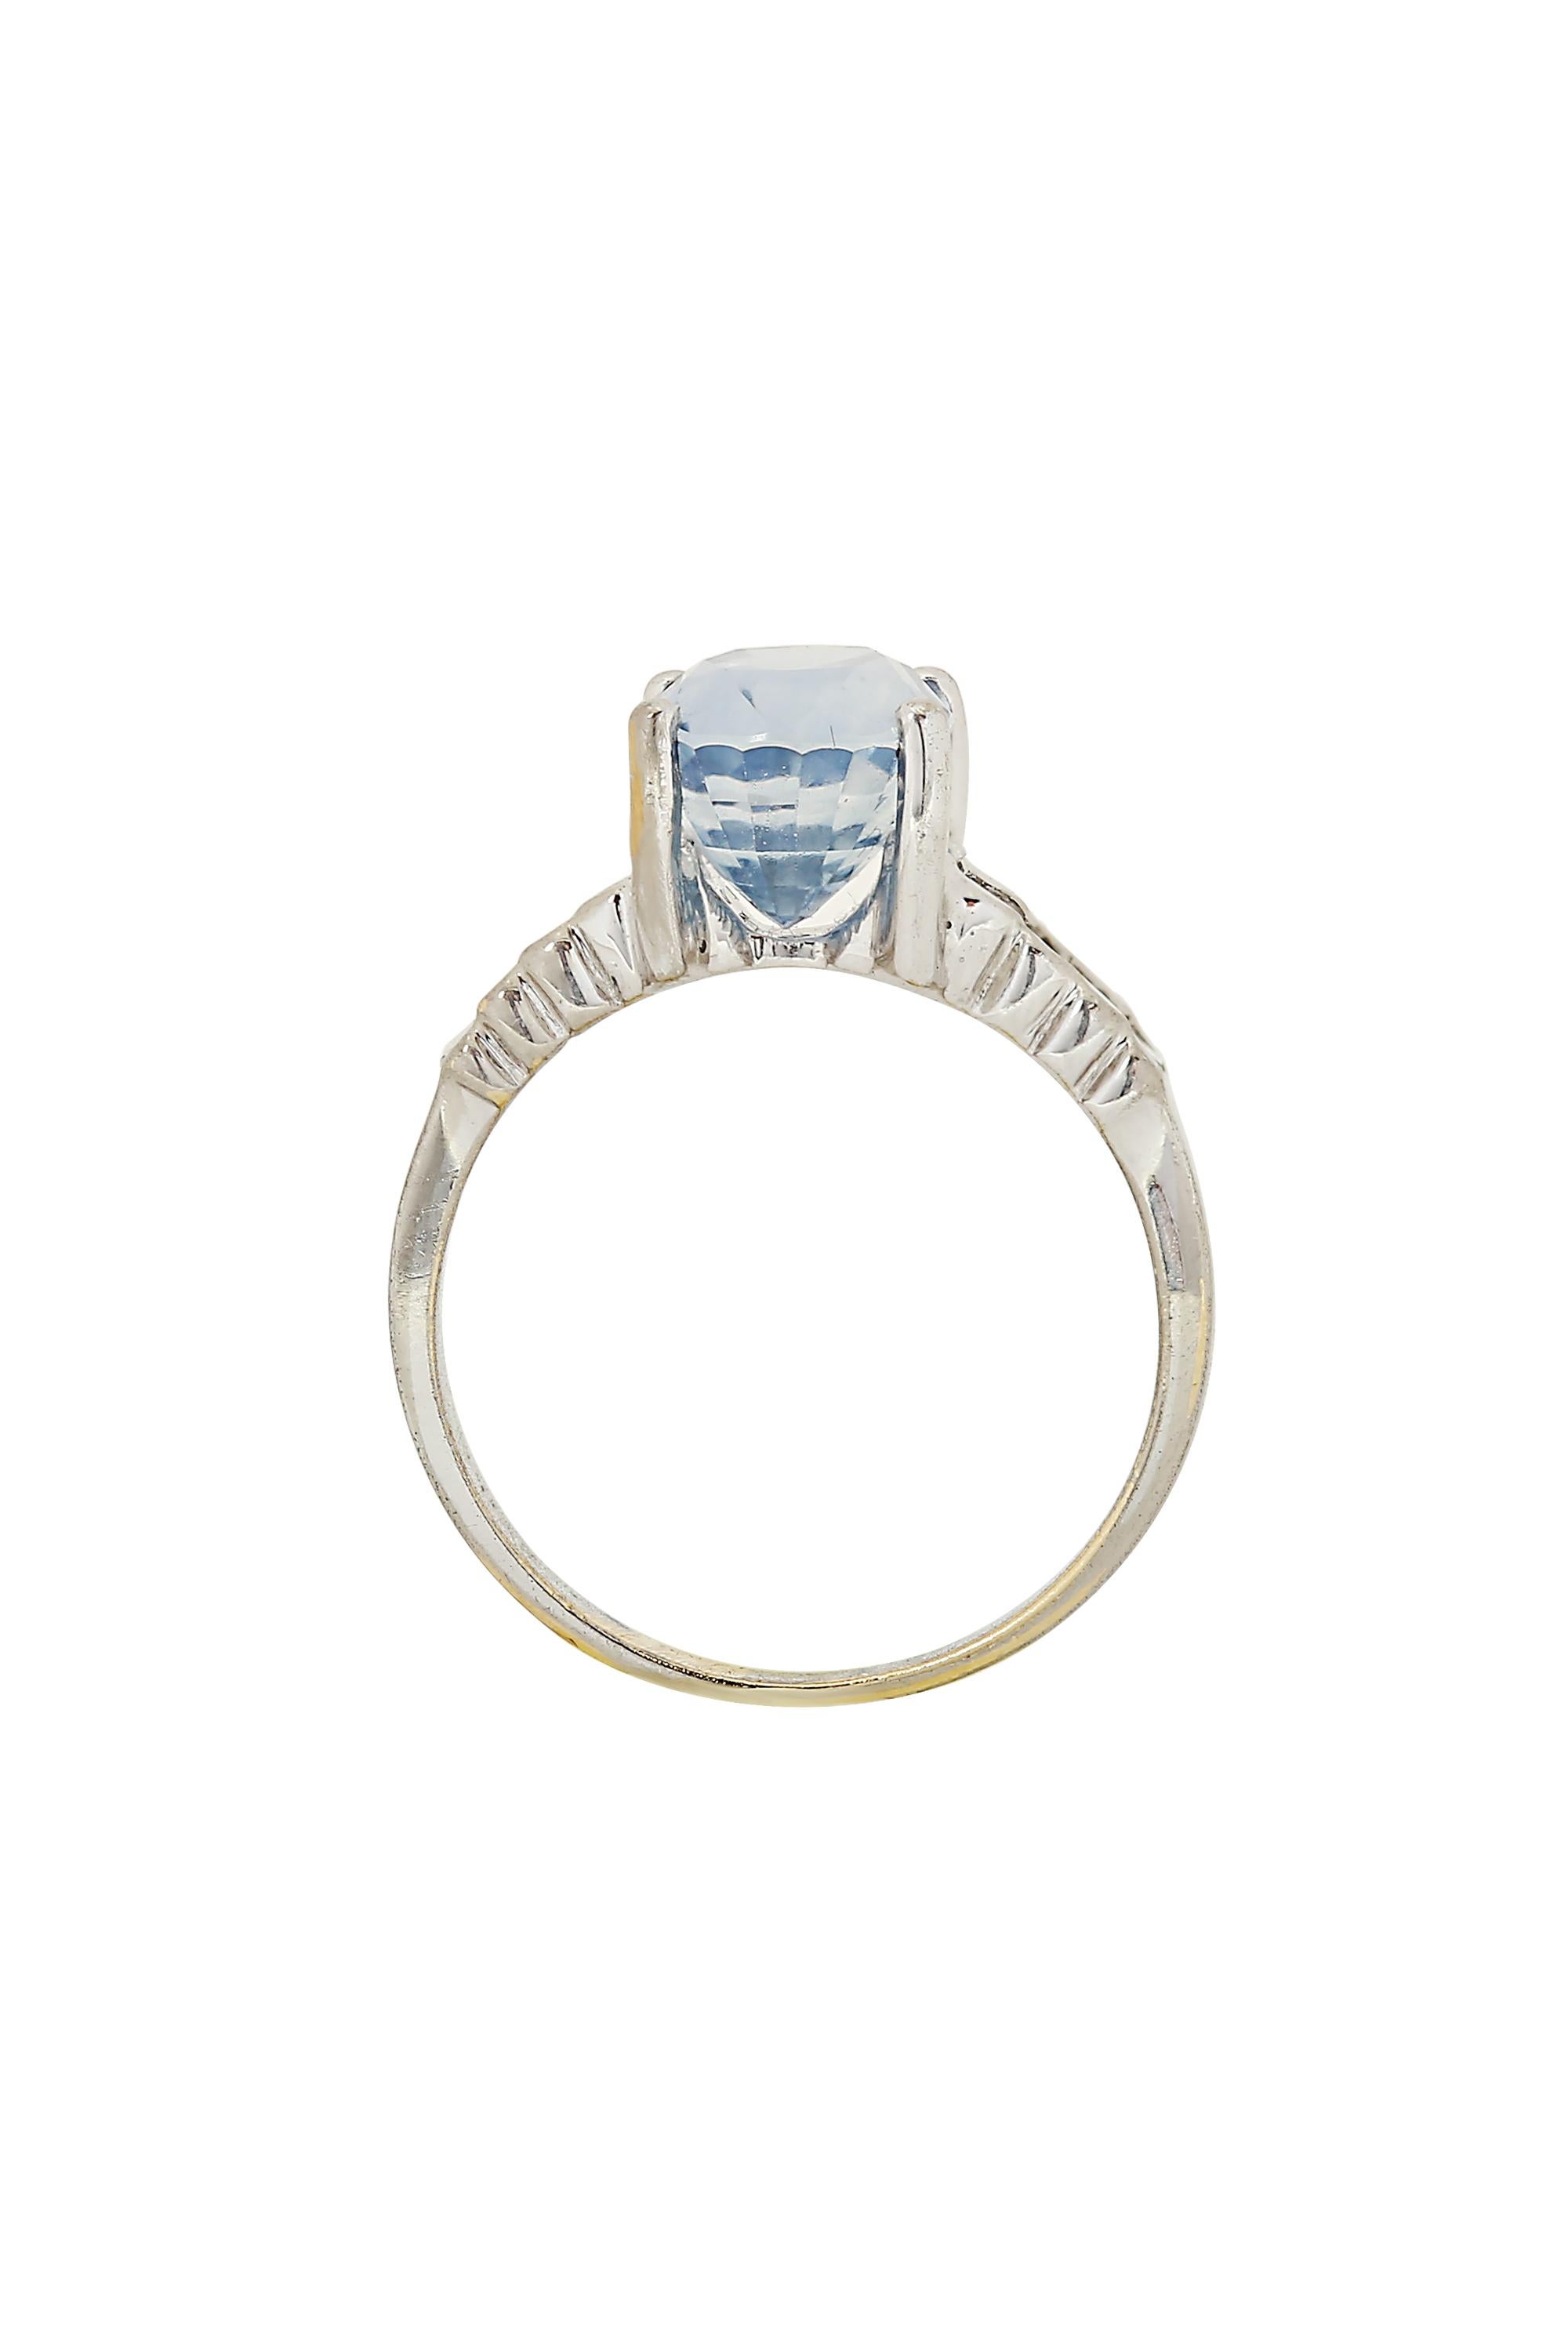 This ring features a delicately hued lavender fancy cut oval sapphire accentuated by shoulders of baguette cut diamonds in a 14 karat white gold mounting. The lavender sapphire weighs approximately 4 carats and is unheated. Currently a size 7 and